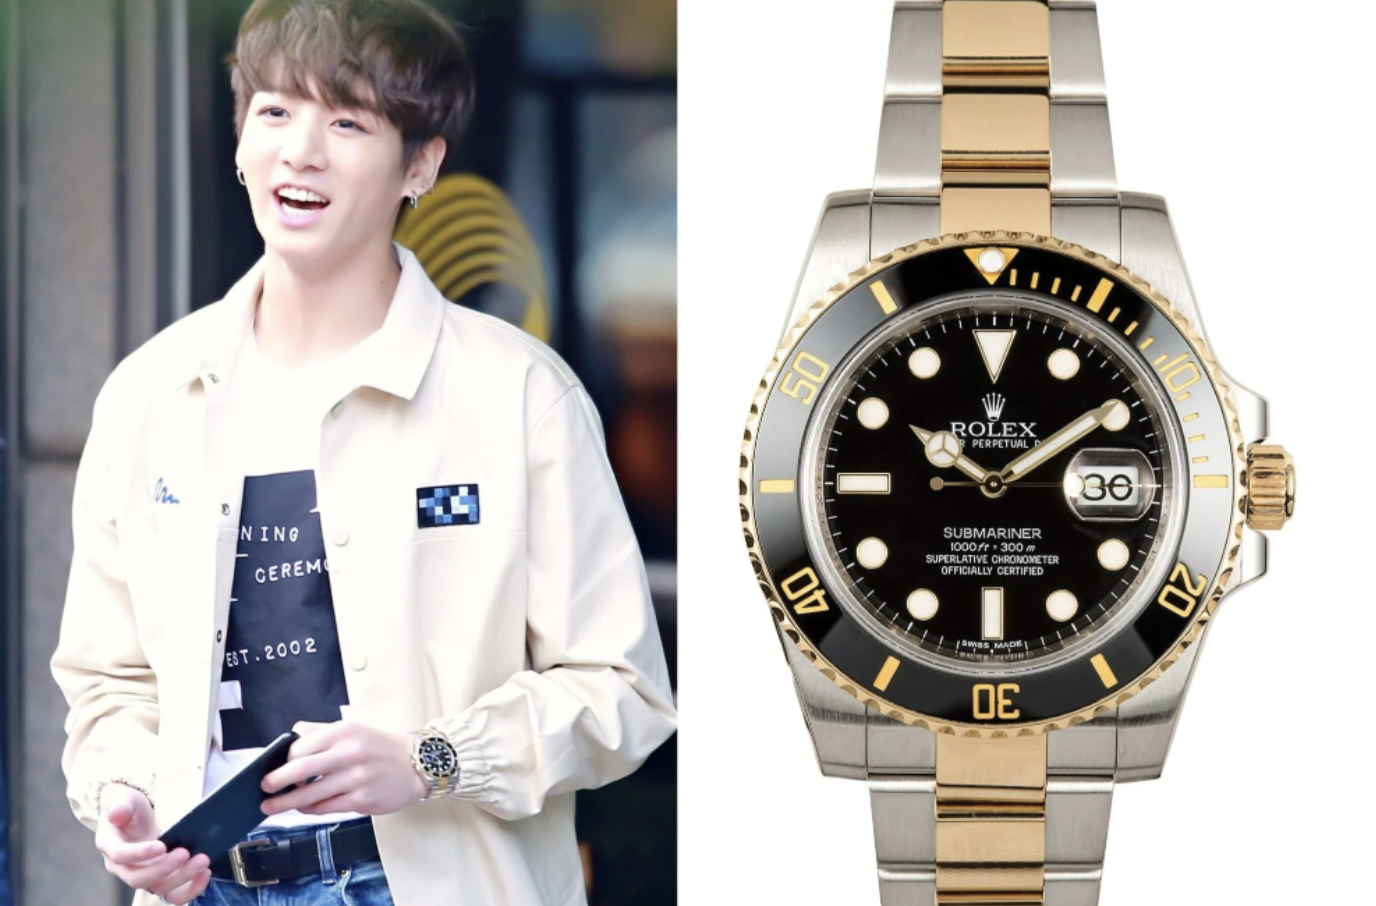 What are some of the most expensive outfits worn by Jungkook of